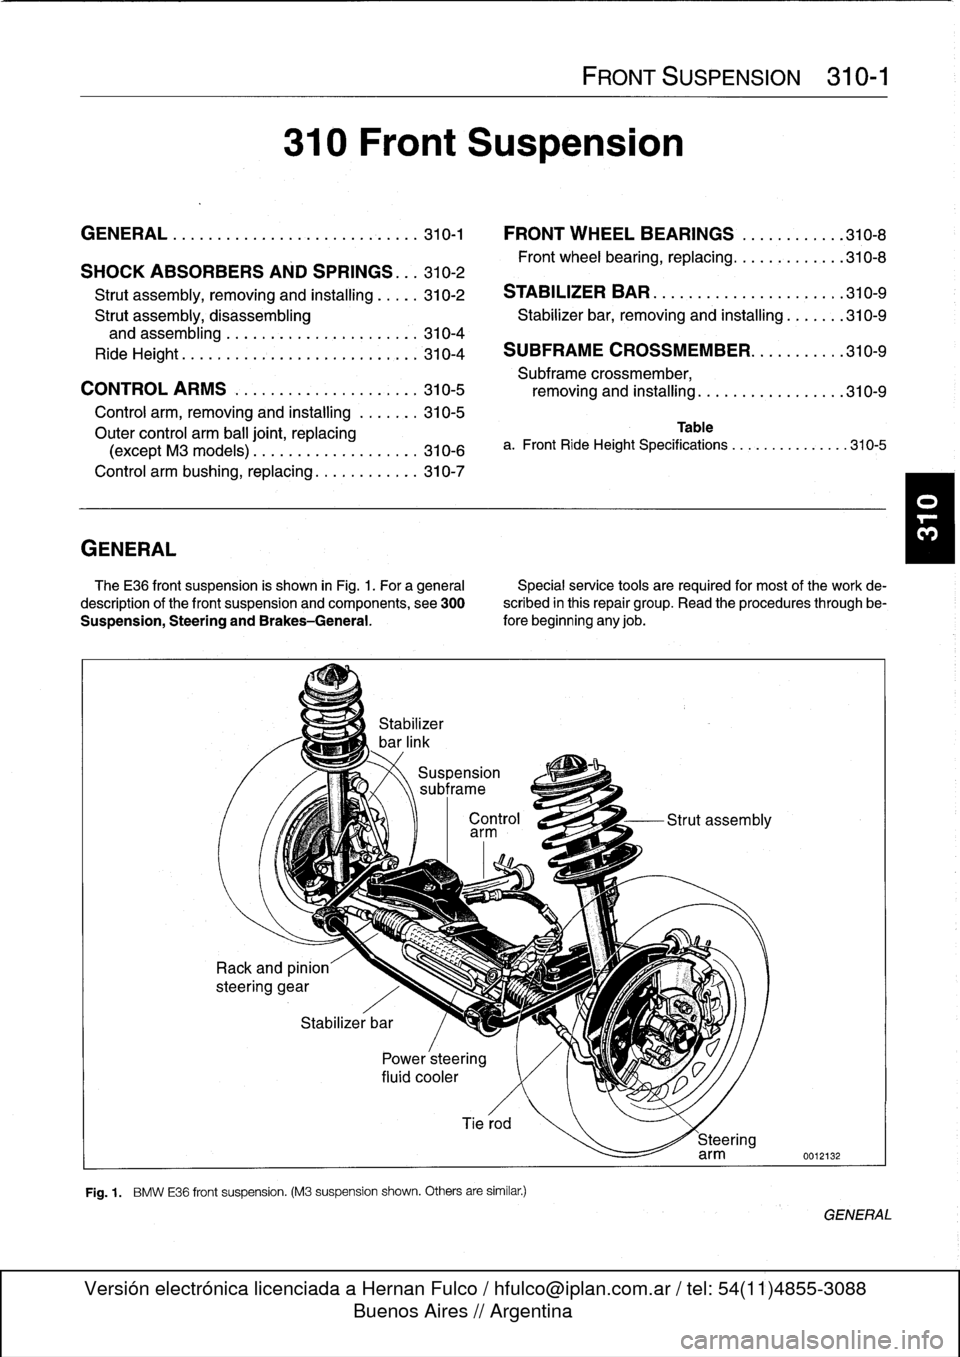 BMW 323i 1997 E36 Owners Manual 
GENERAL

310
Front
Suspension

GENERAL
..
.
.
.
.
.
.
.
.
.
.......
.
........
.
310-1

	

FRONT
WHEEL
BEARINGS
..
.
.
.
.......
310-8

SHOCK
ABSORBERS
AND
SPRINGS
..
.
310-2

	

Front
wheel
bearing,